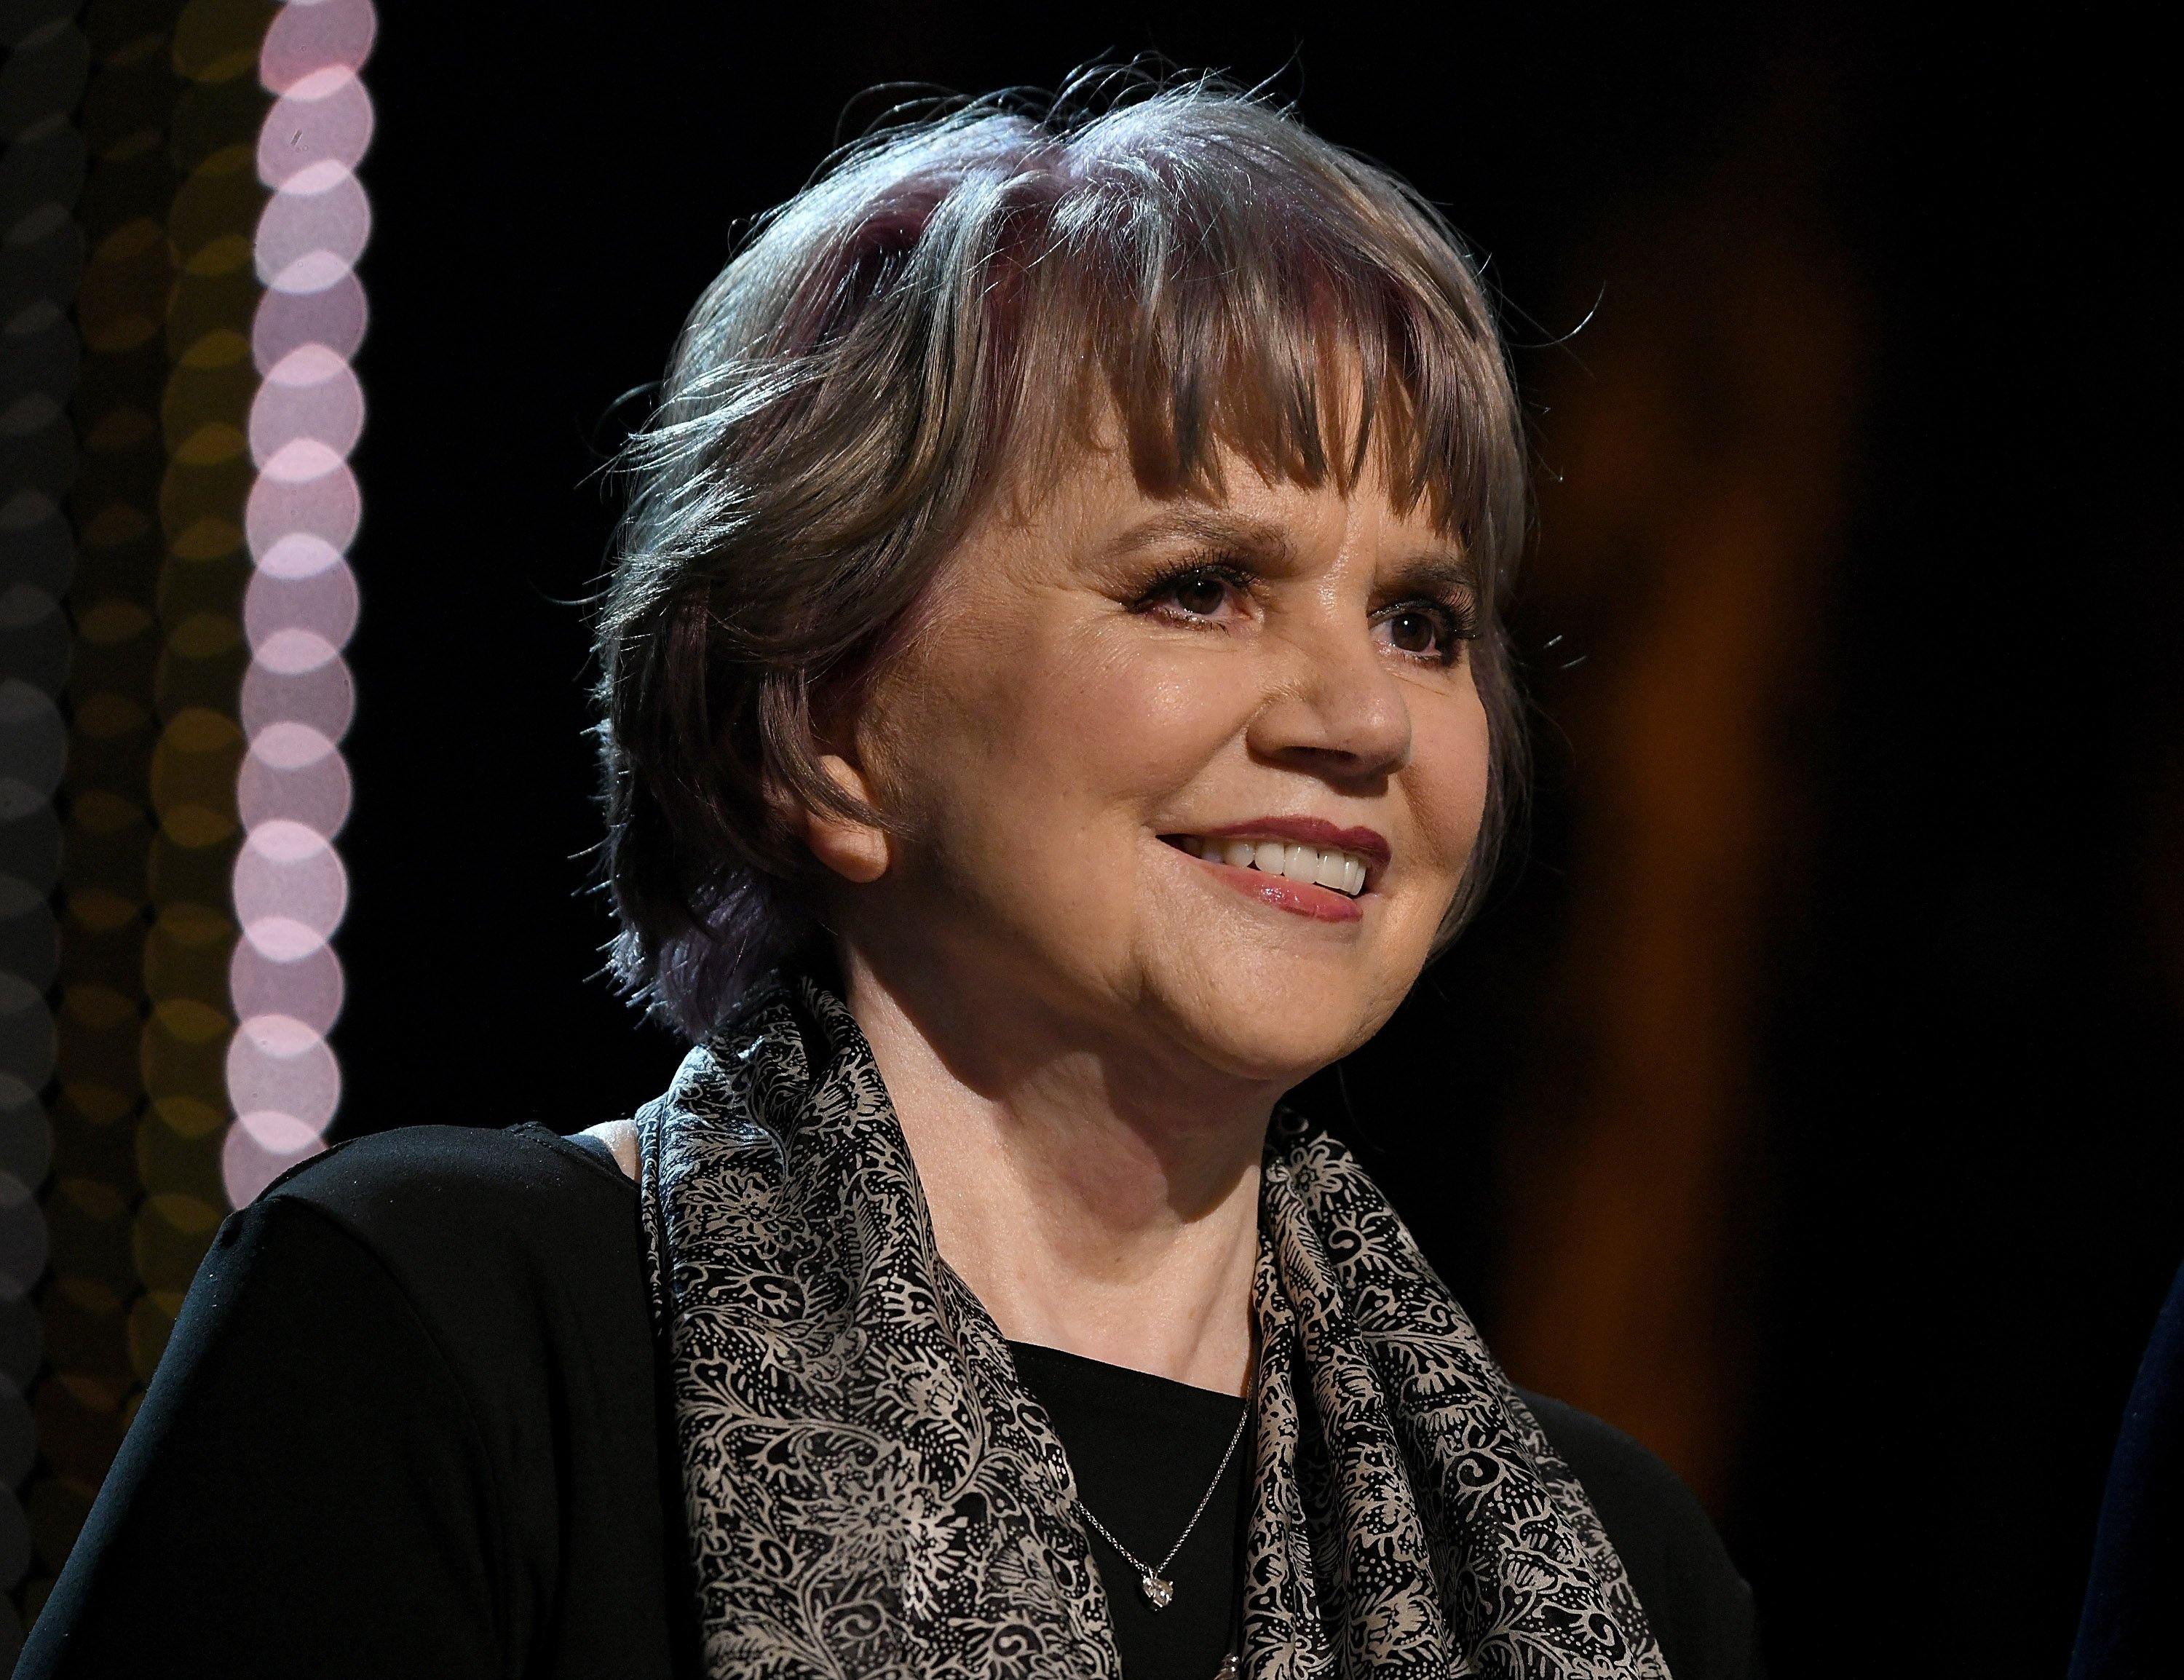 Linda Ronstadt speaks at the MusiCares Person of the Year honoring Dolly Parton at Los Angeles Convention Center on February 8, 2019 in Los Angeles, California.┃Source: Getty Images